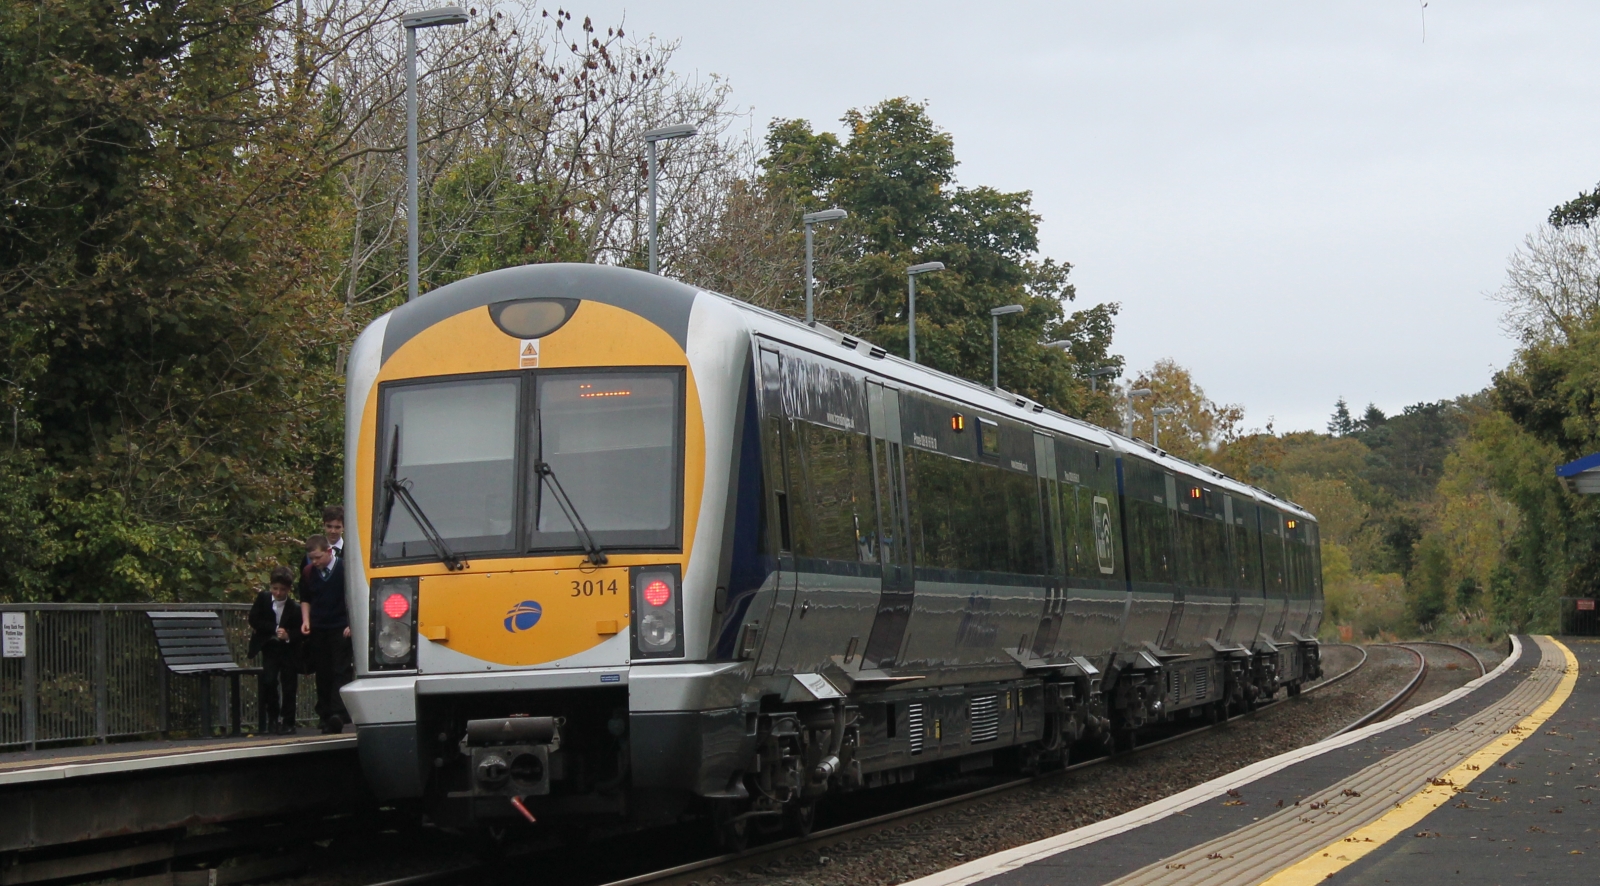 3014 in October 2015 in Seahill